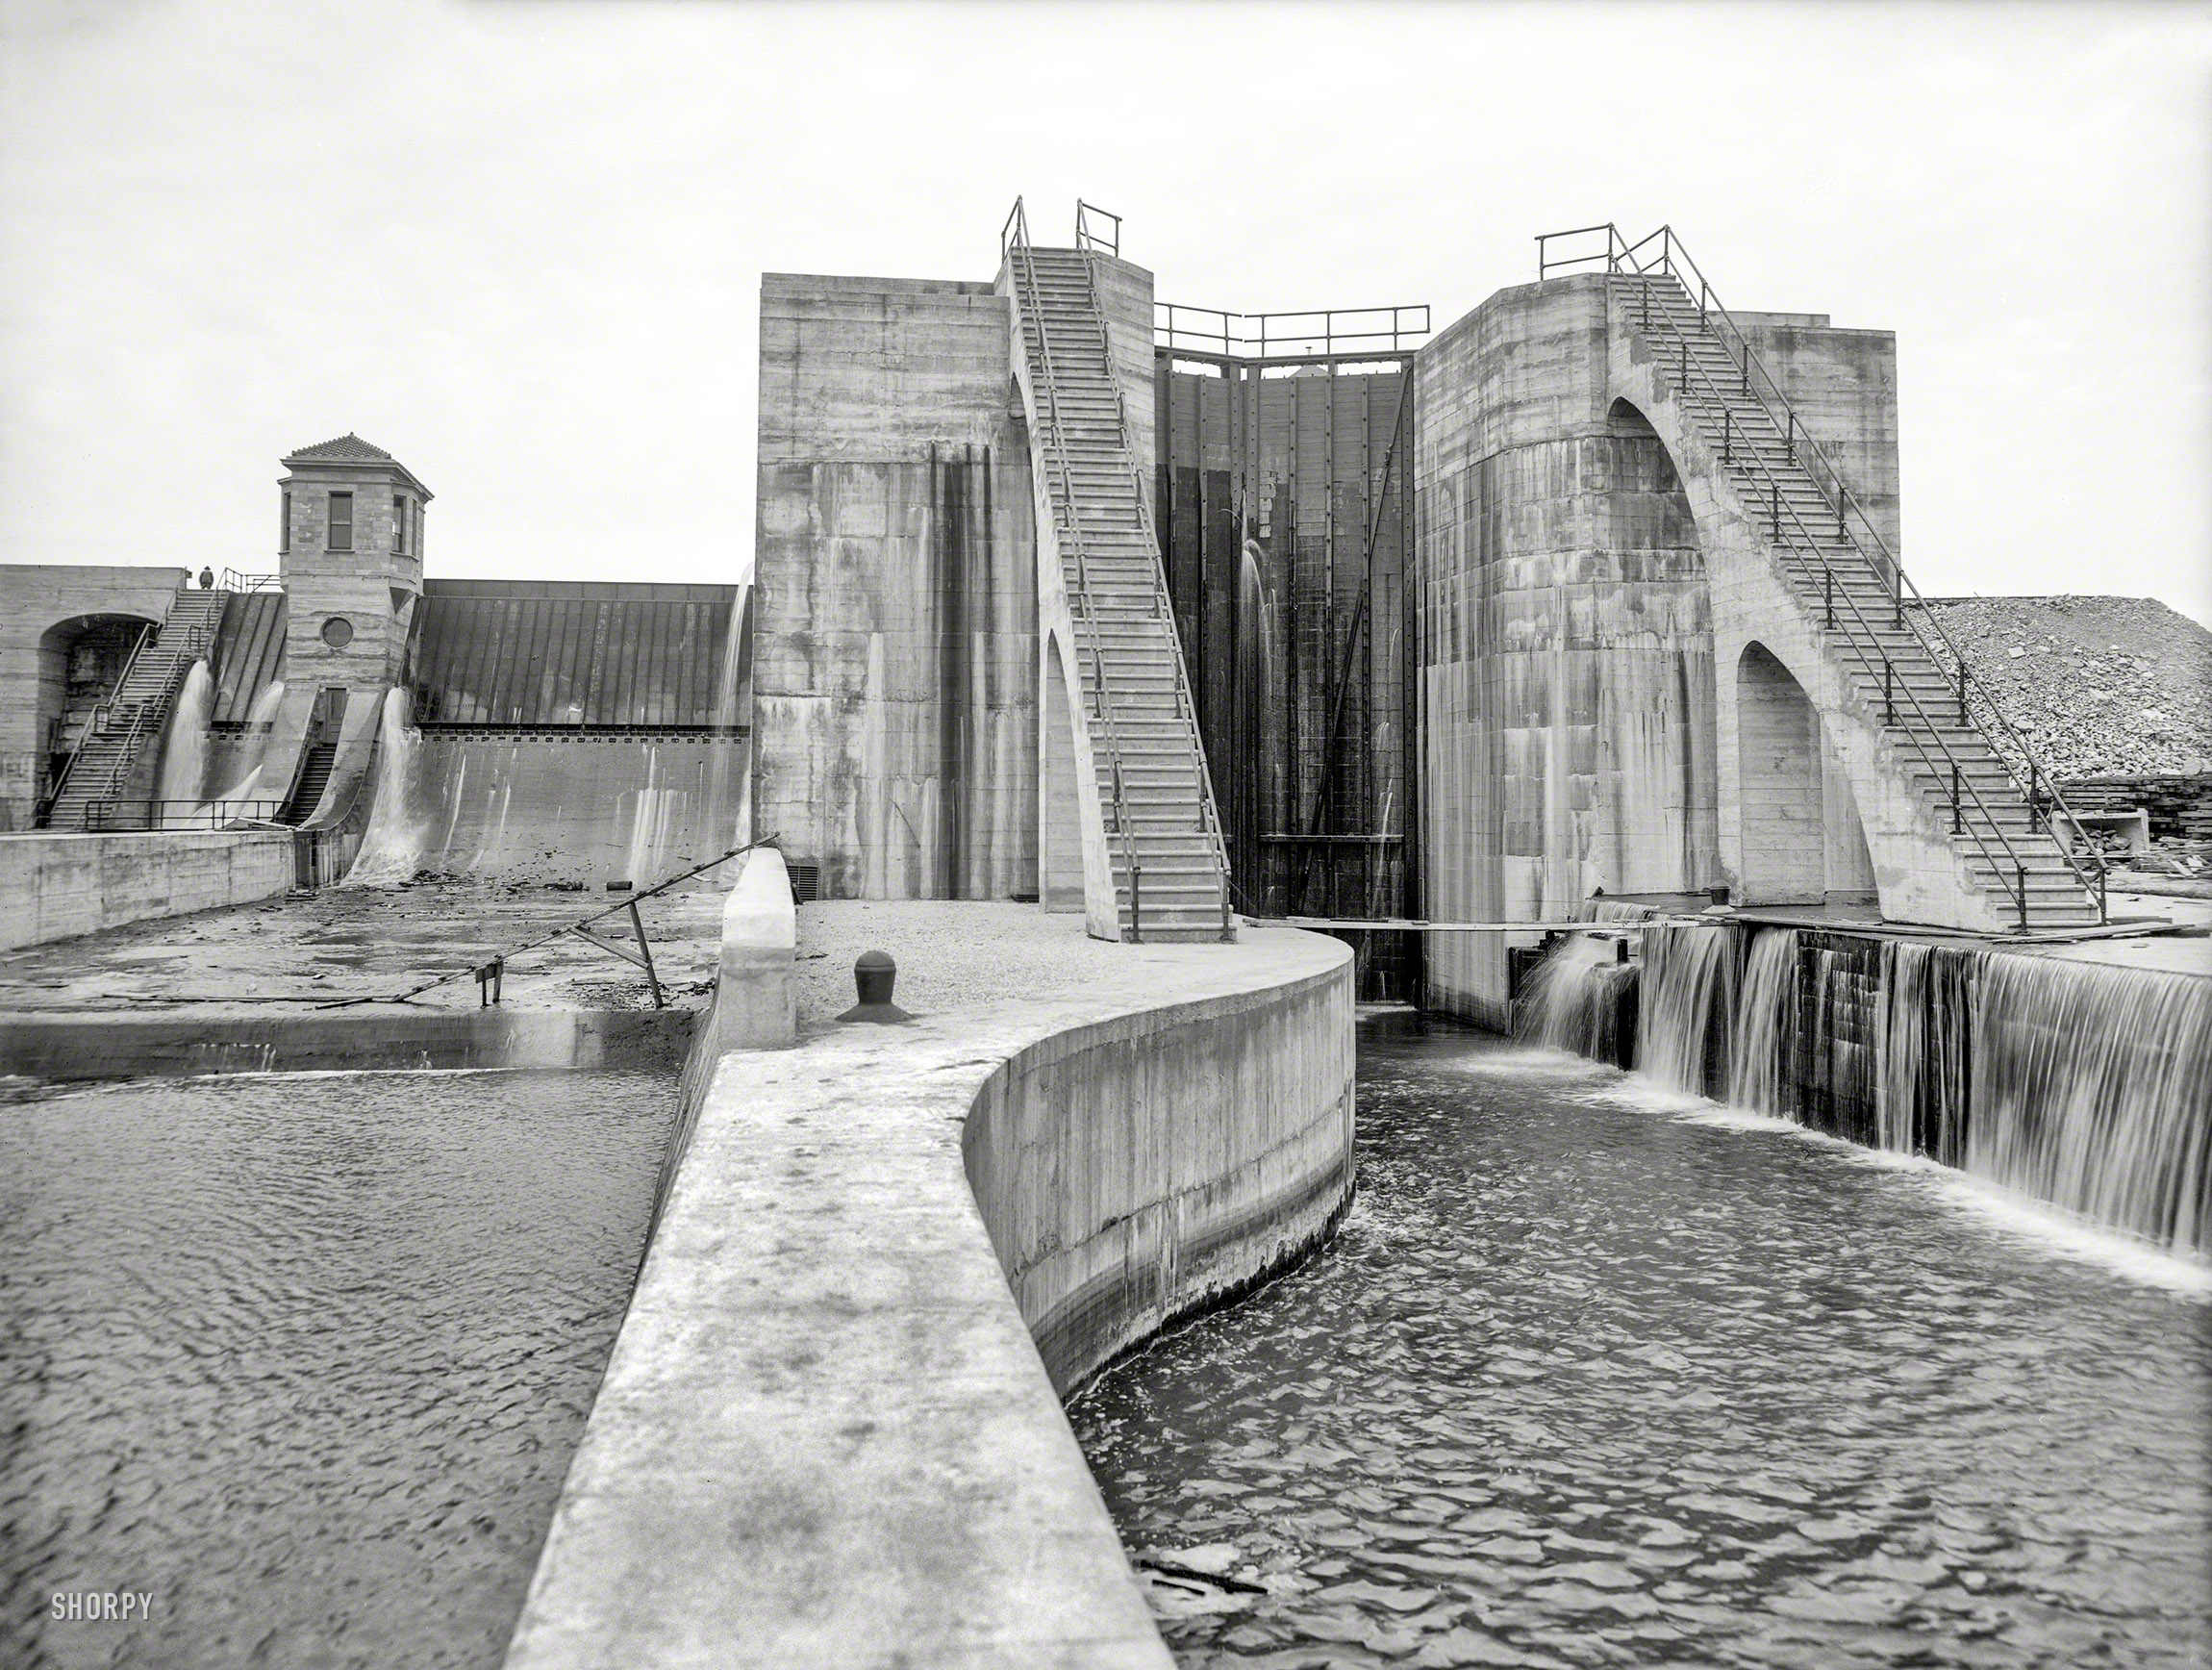 1908. "The Great Locks, Chicago Drainage Canal, Lockport, Illinois." 8x10 inch dry plate glass negative, Detroit Publishing Company. View full size.